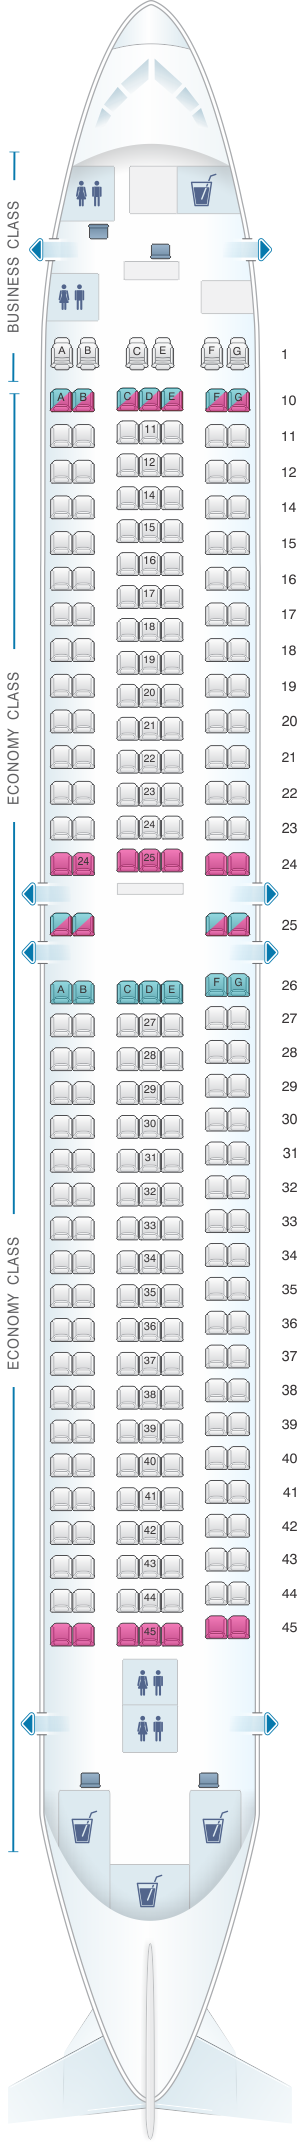 Seat map for Transaero Airlines Boeing B767 300 Config. 4